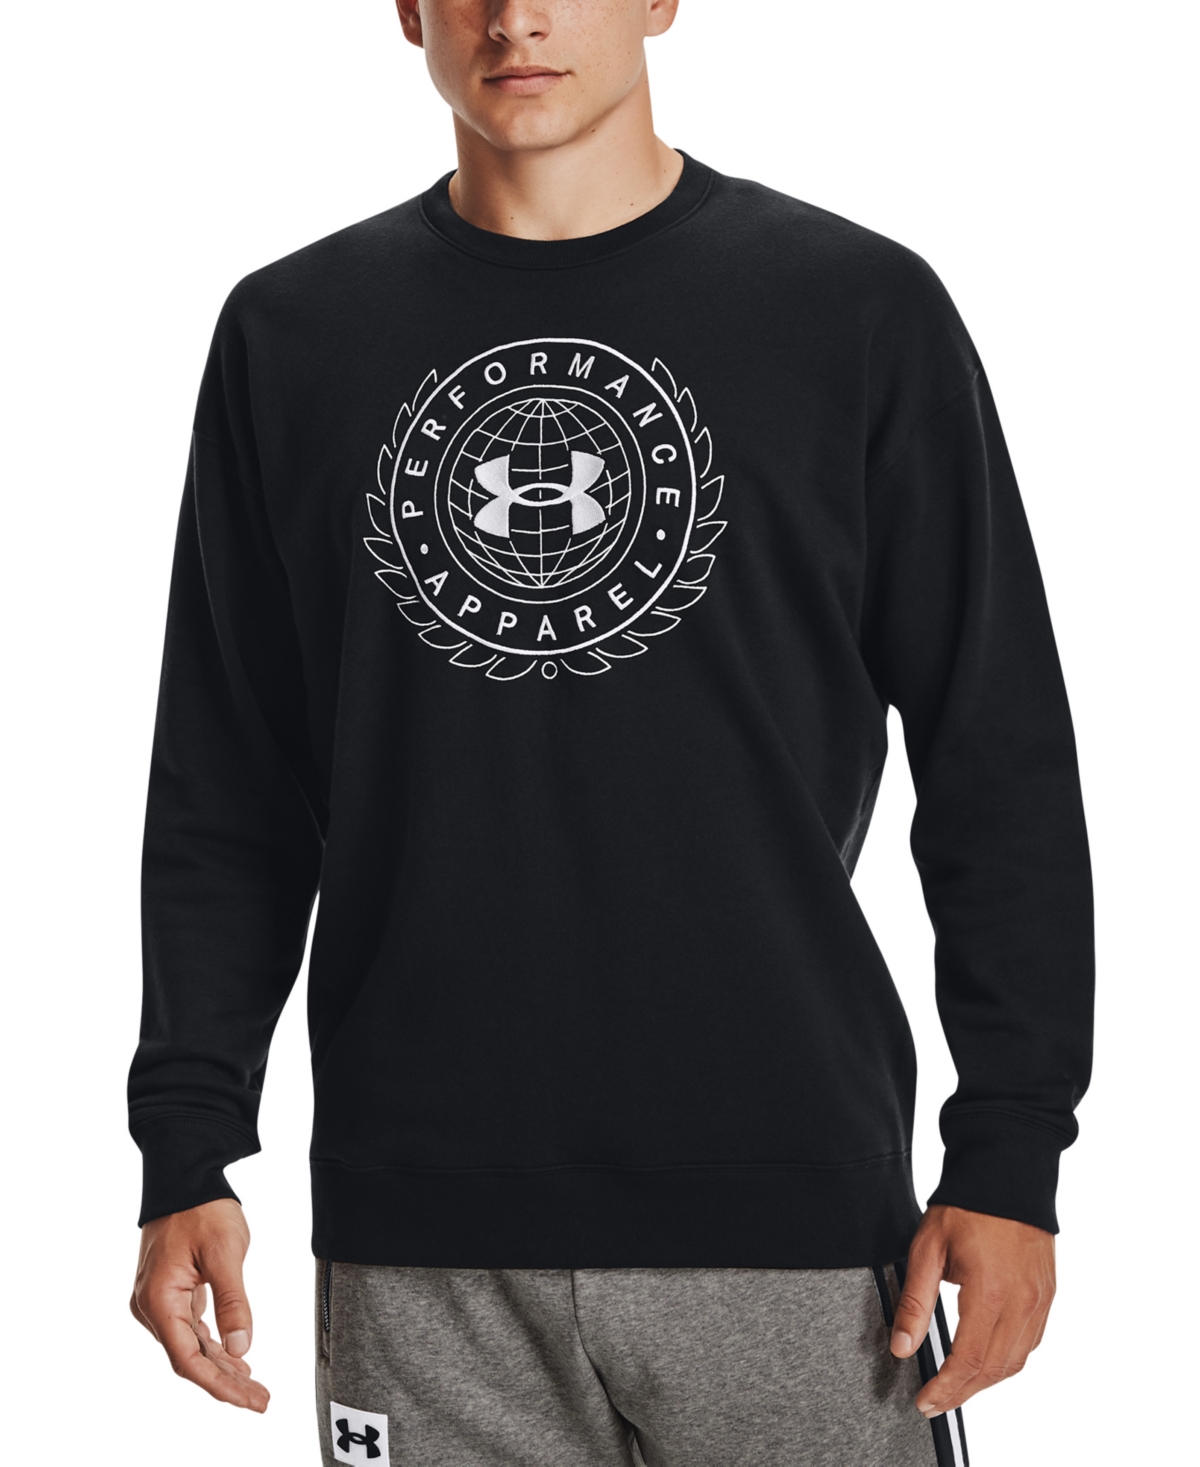 Under Armour Men's Revival Alma Mater Graphic Logo Long-Sleeve T-Shirt from Under Armour AccuWeather Shop